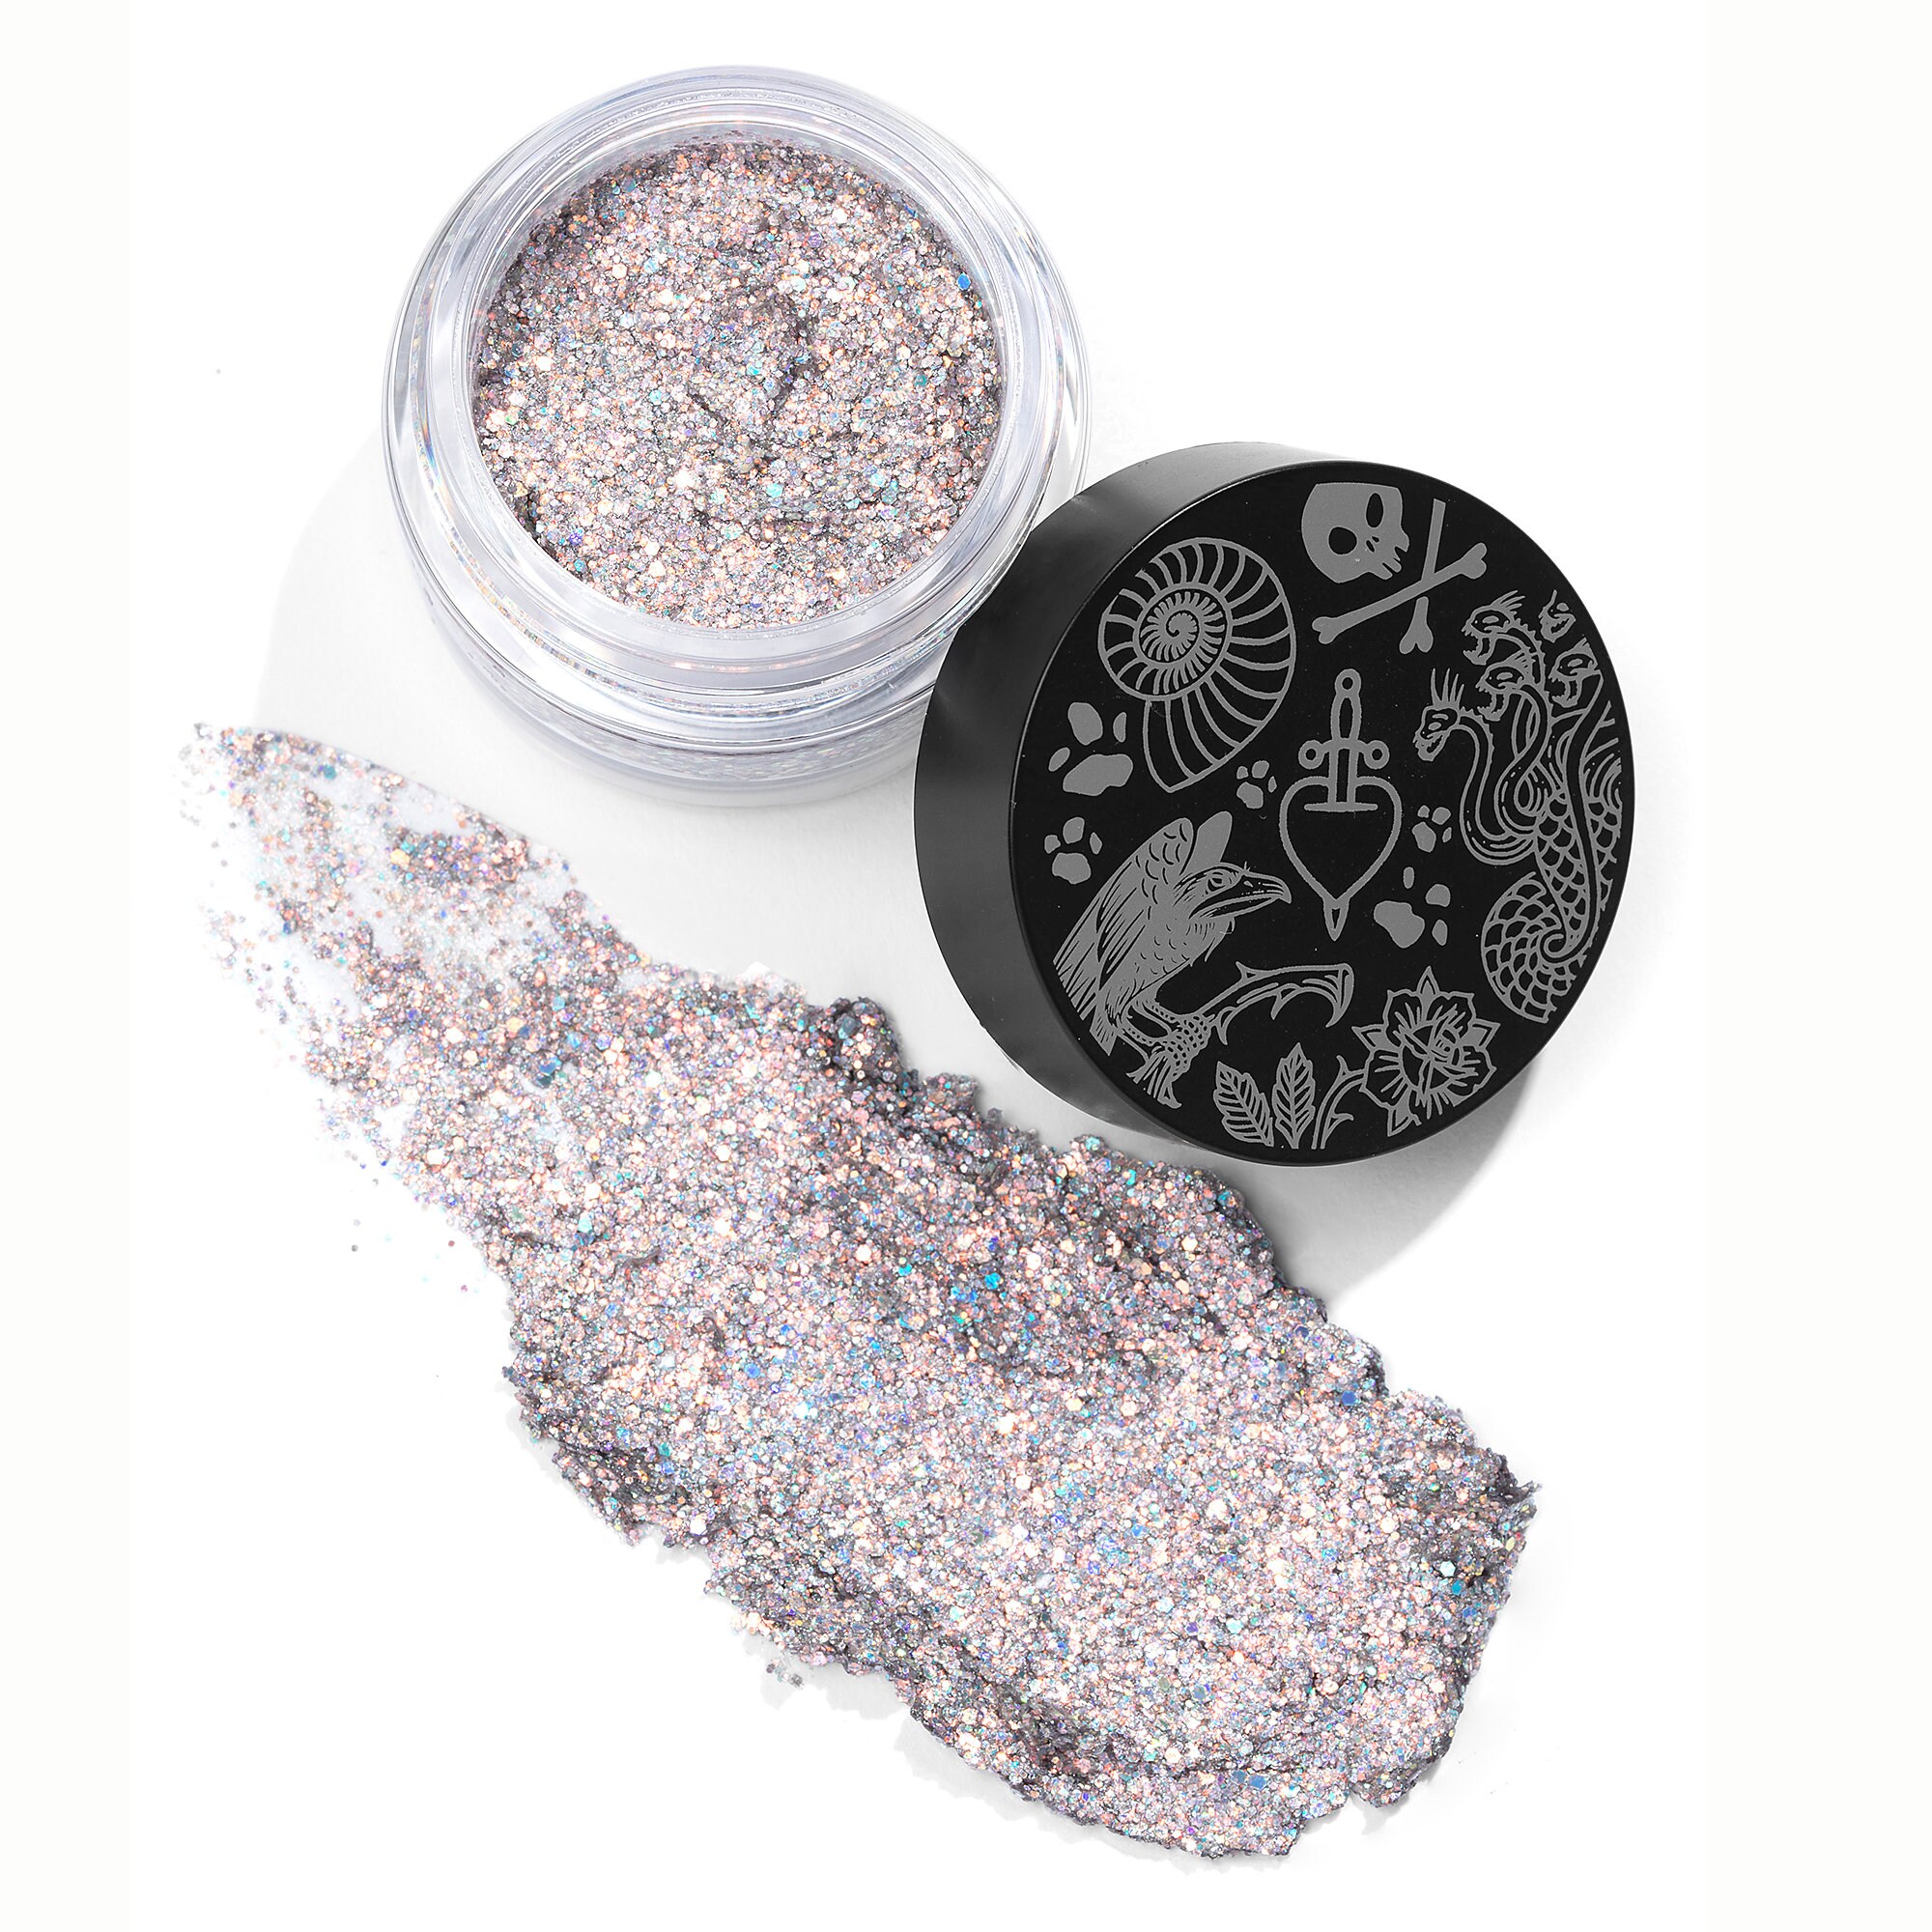 Disney Villains ''Do I Look Like I Care?'' Glitterally Obsessed Face and Body Glitter by ColourPop